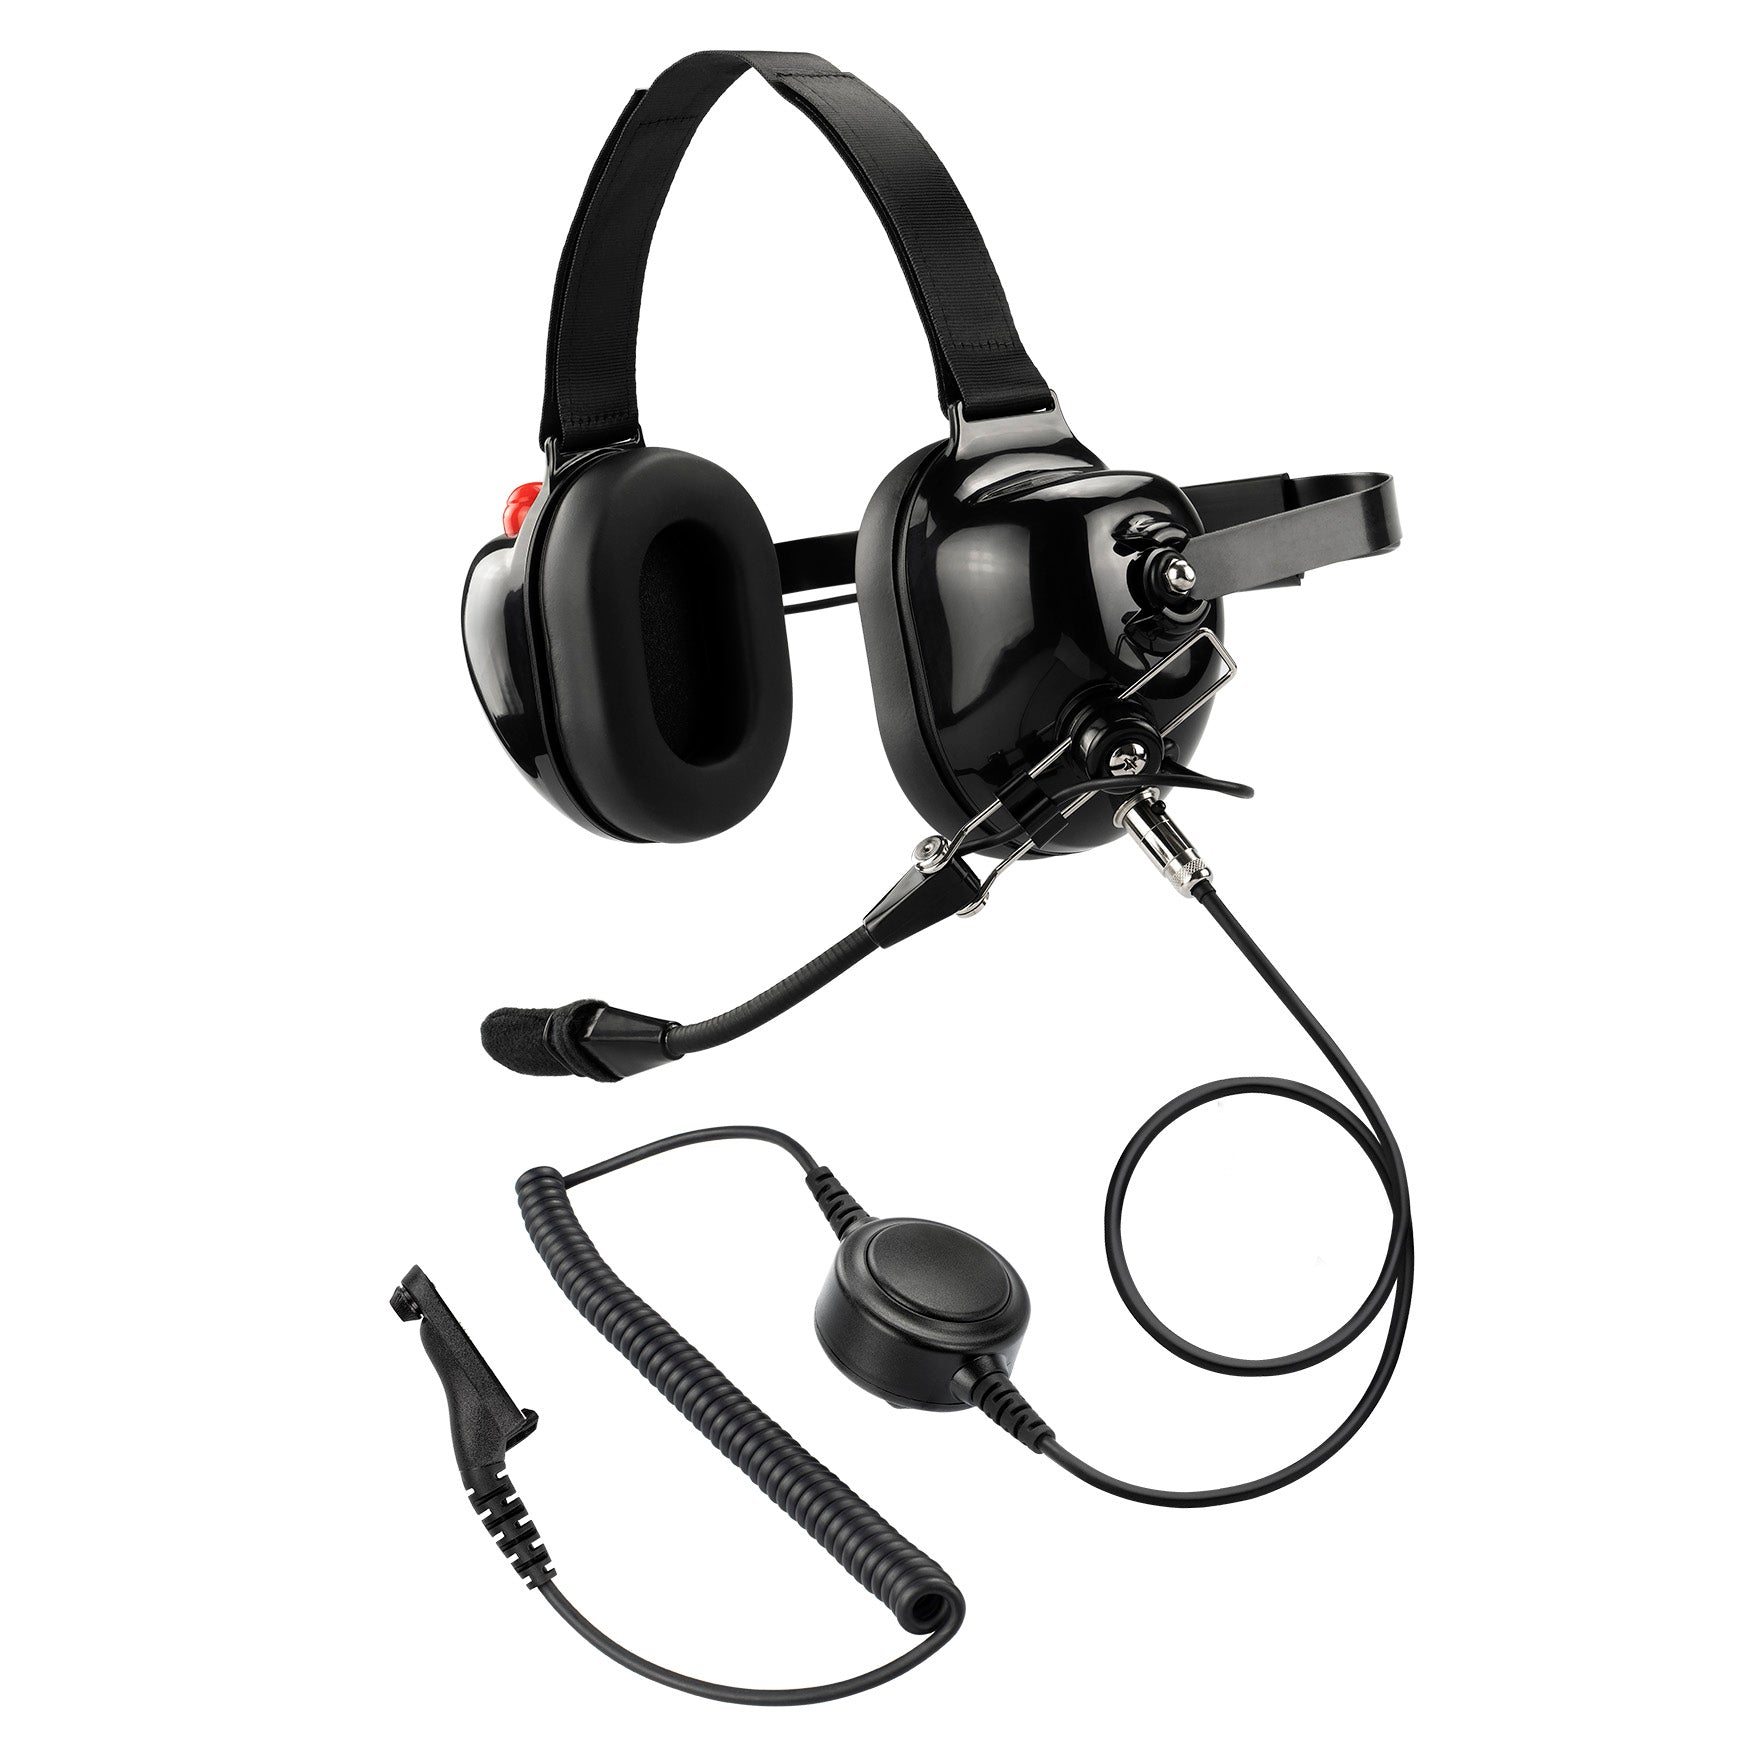 Noise Cancelling Headset for Motorola APX7000 XPR7350 DGP8000 XiRP8600